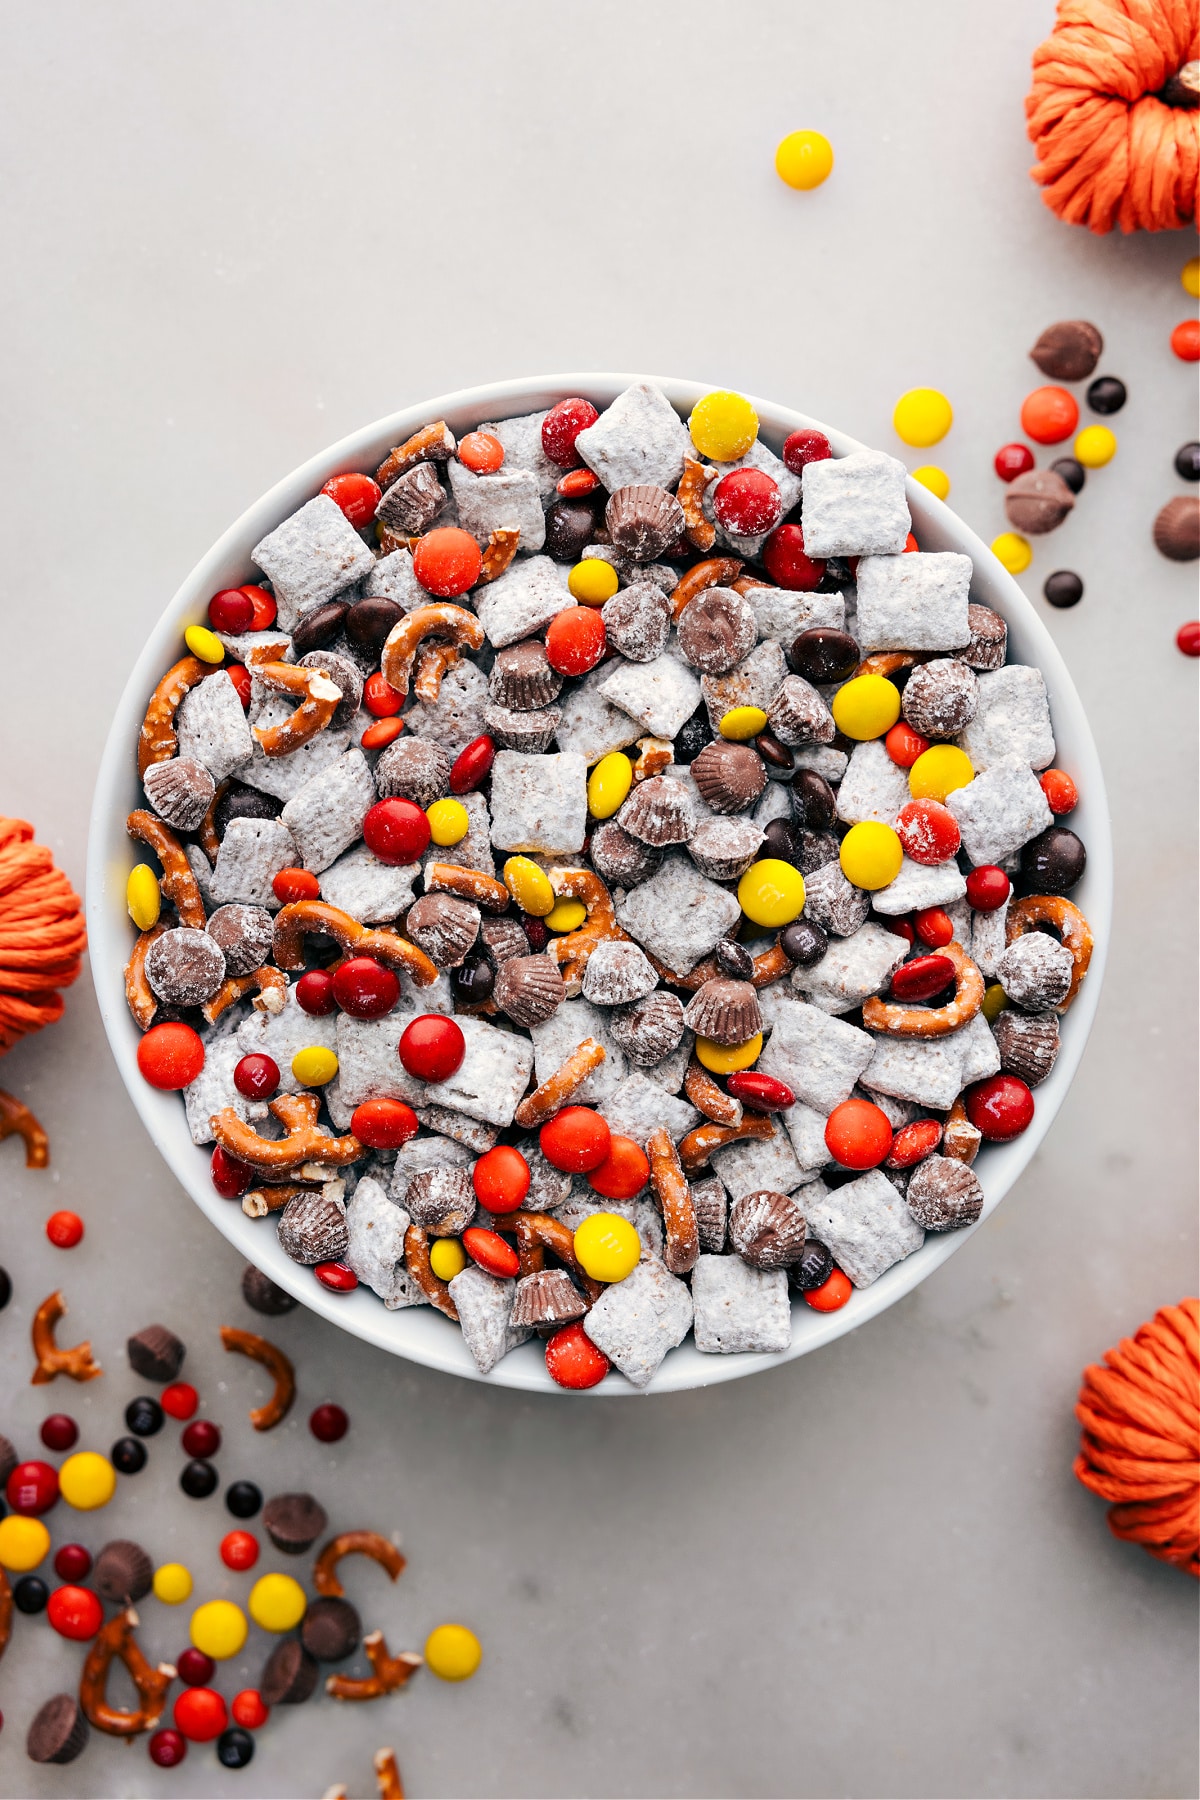 A bowl of Fall Muddy Buddies, showcasing the delightful mix of cereals coated in chocolate and powdered sugar, punctuated by autumn-themed candies and snacks for a festive treat.